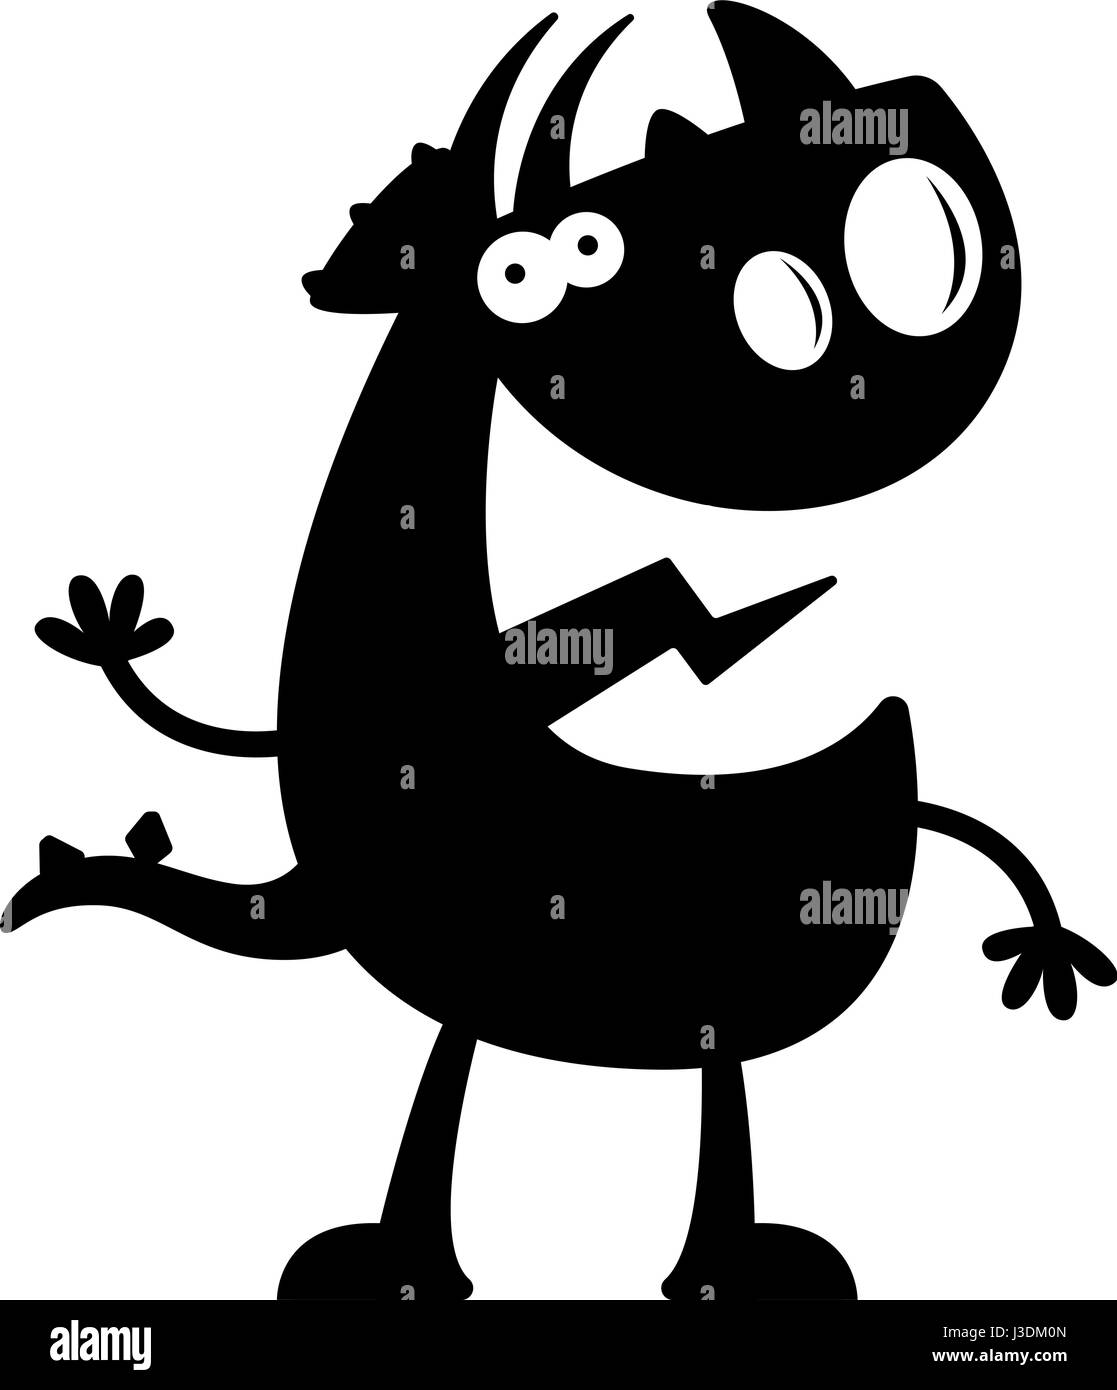 A cartoon silhouette of a triceratops dinosaur waving. Stock Vector